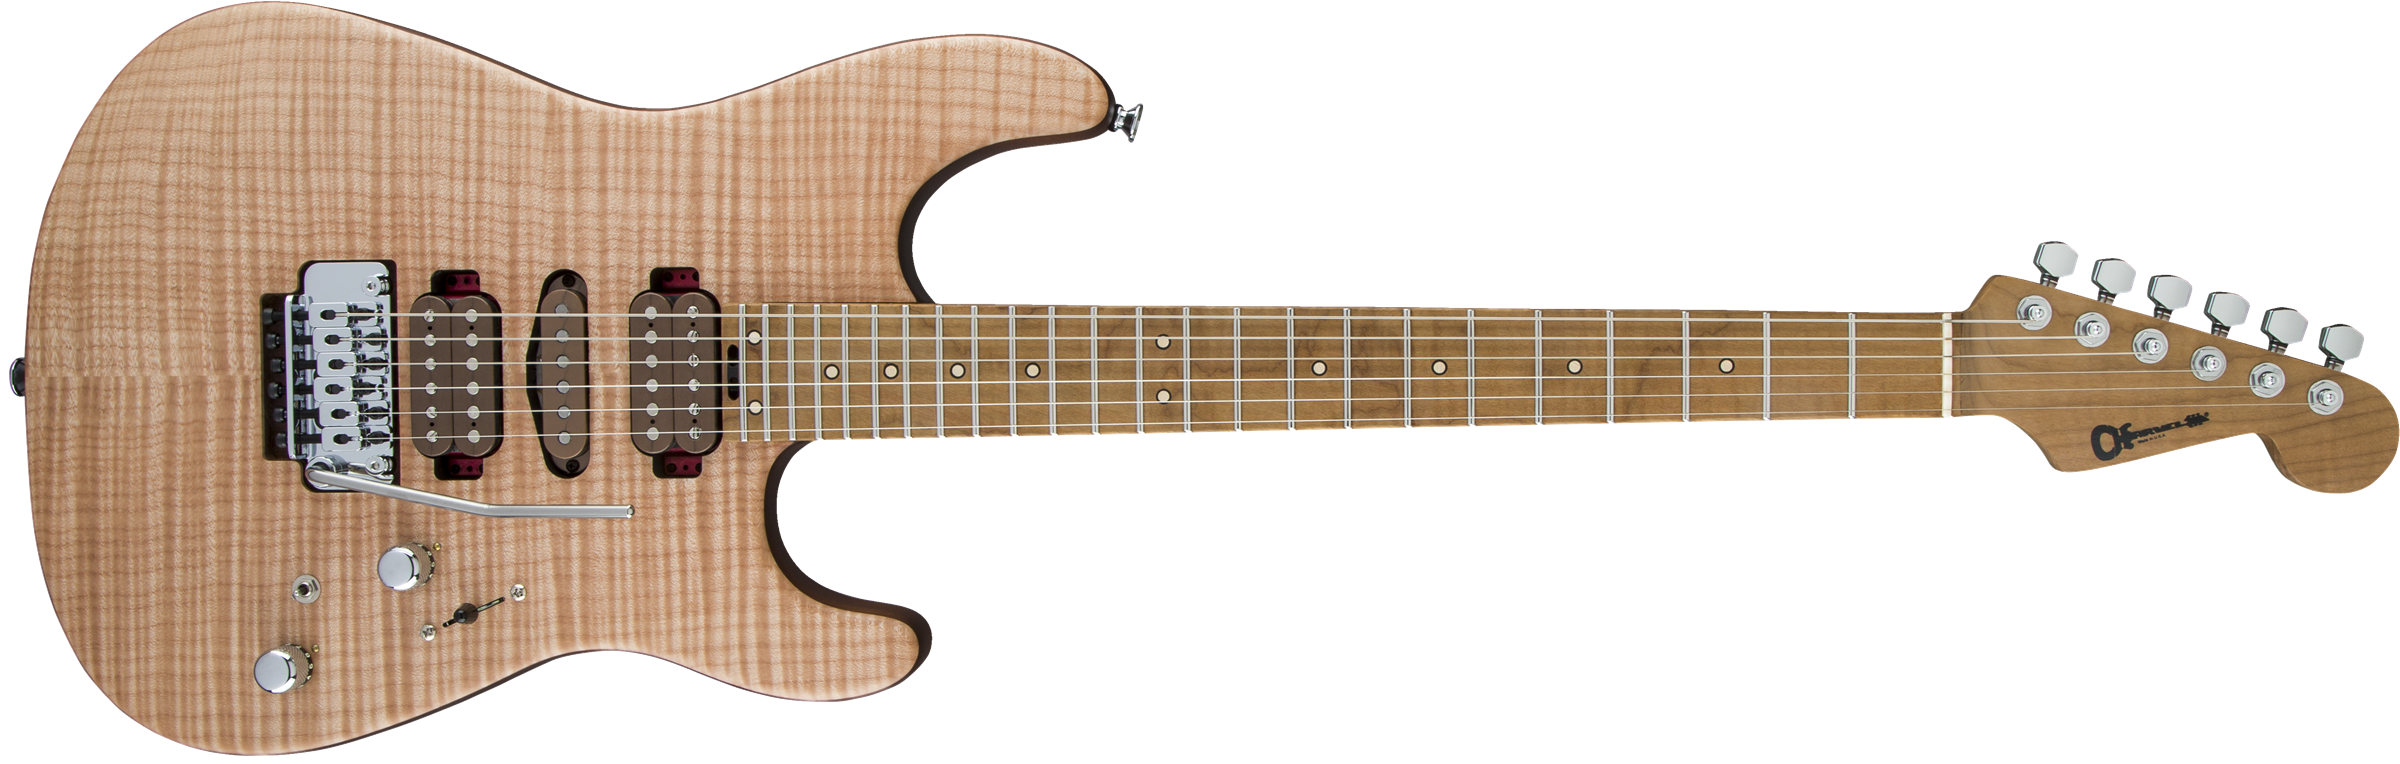 Charvel Guthrie Govan Signature HSH Flame Maple Caramelized Flame Maple Fingerboard Natural Model 2865434701